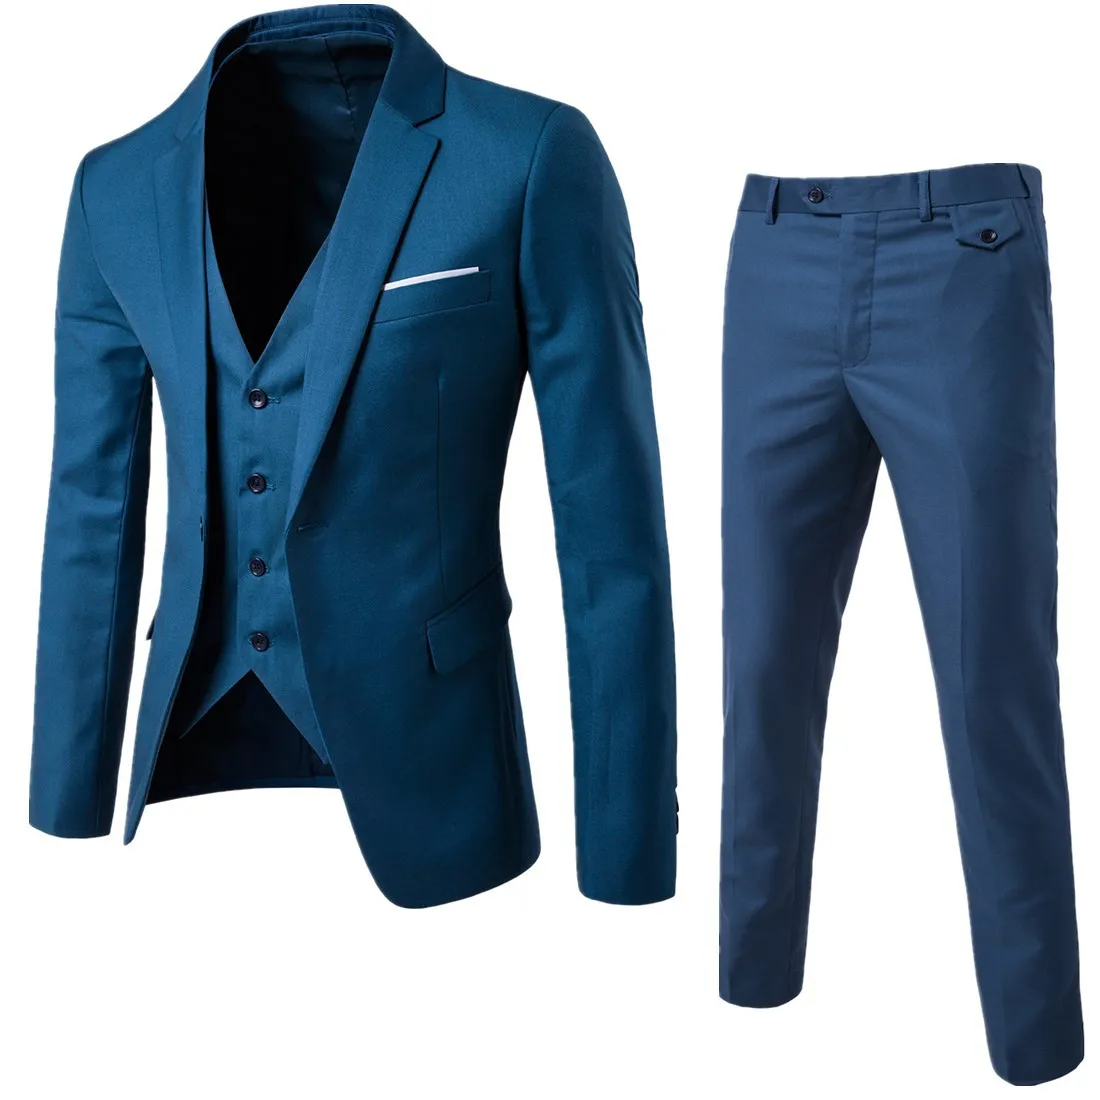 

2023 foreign trade four seasons business casual suit three-piece set groom groomsman wedding suit 9 colors S-6XL